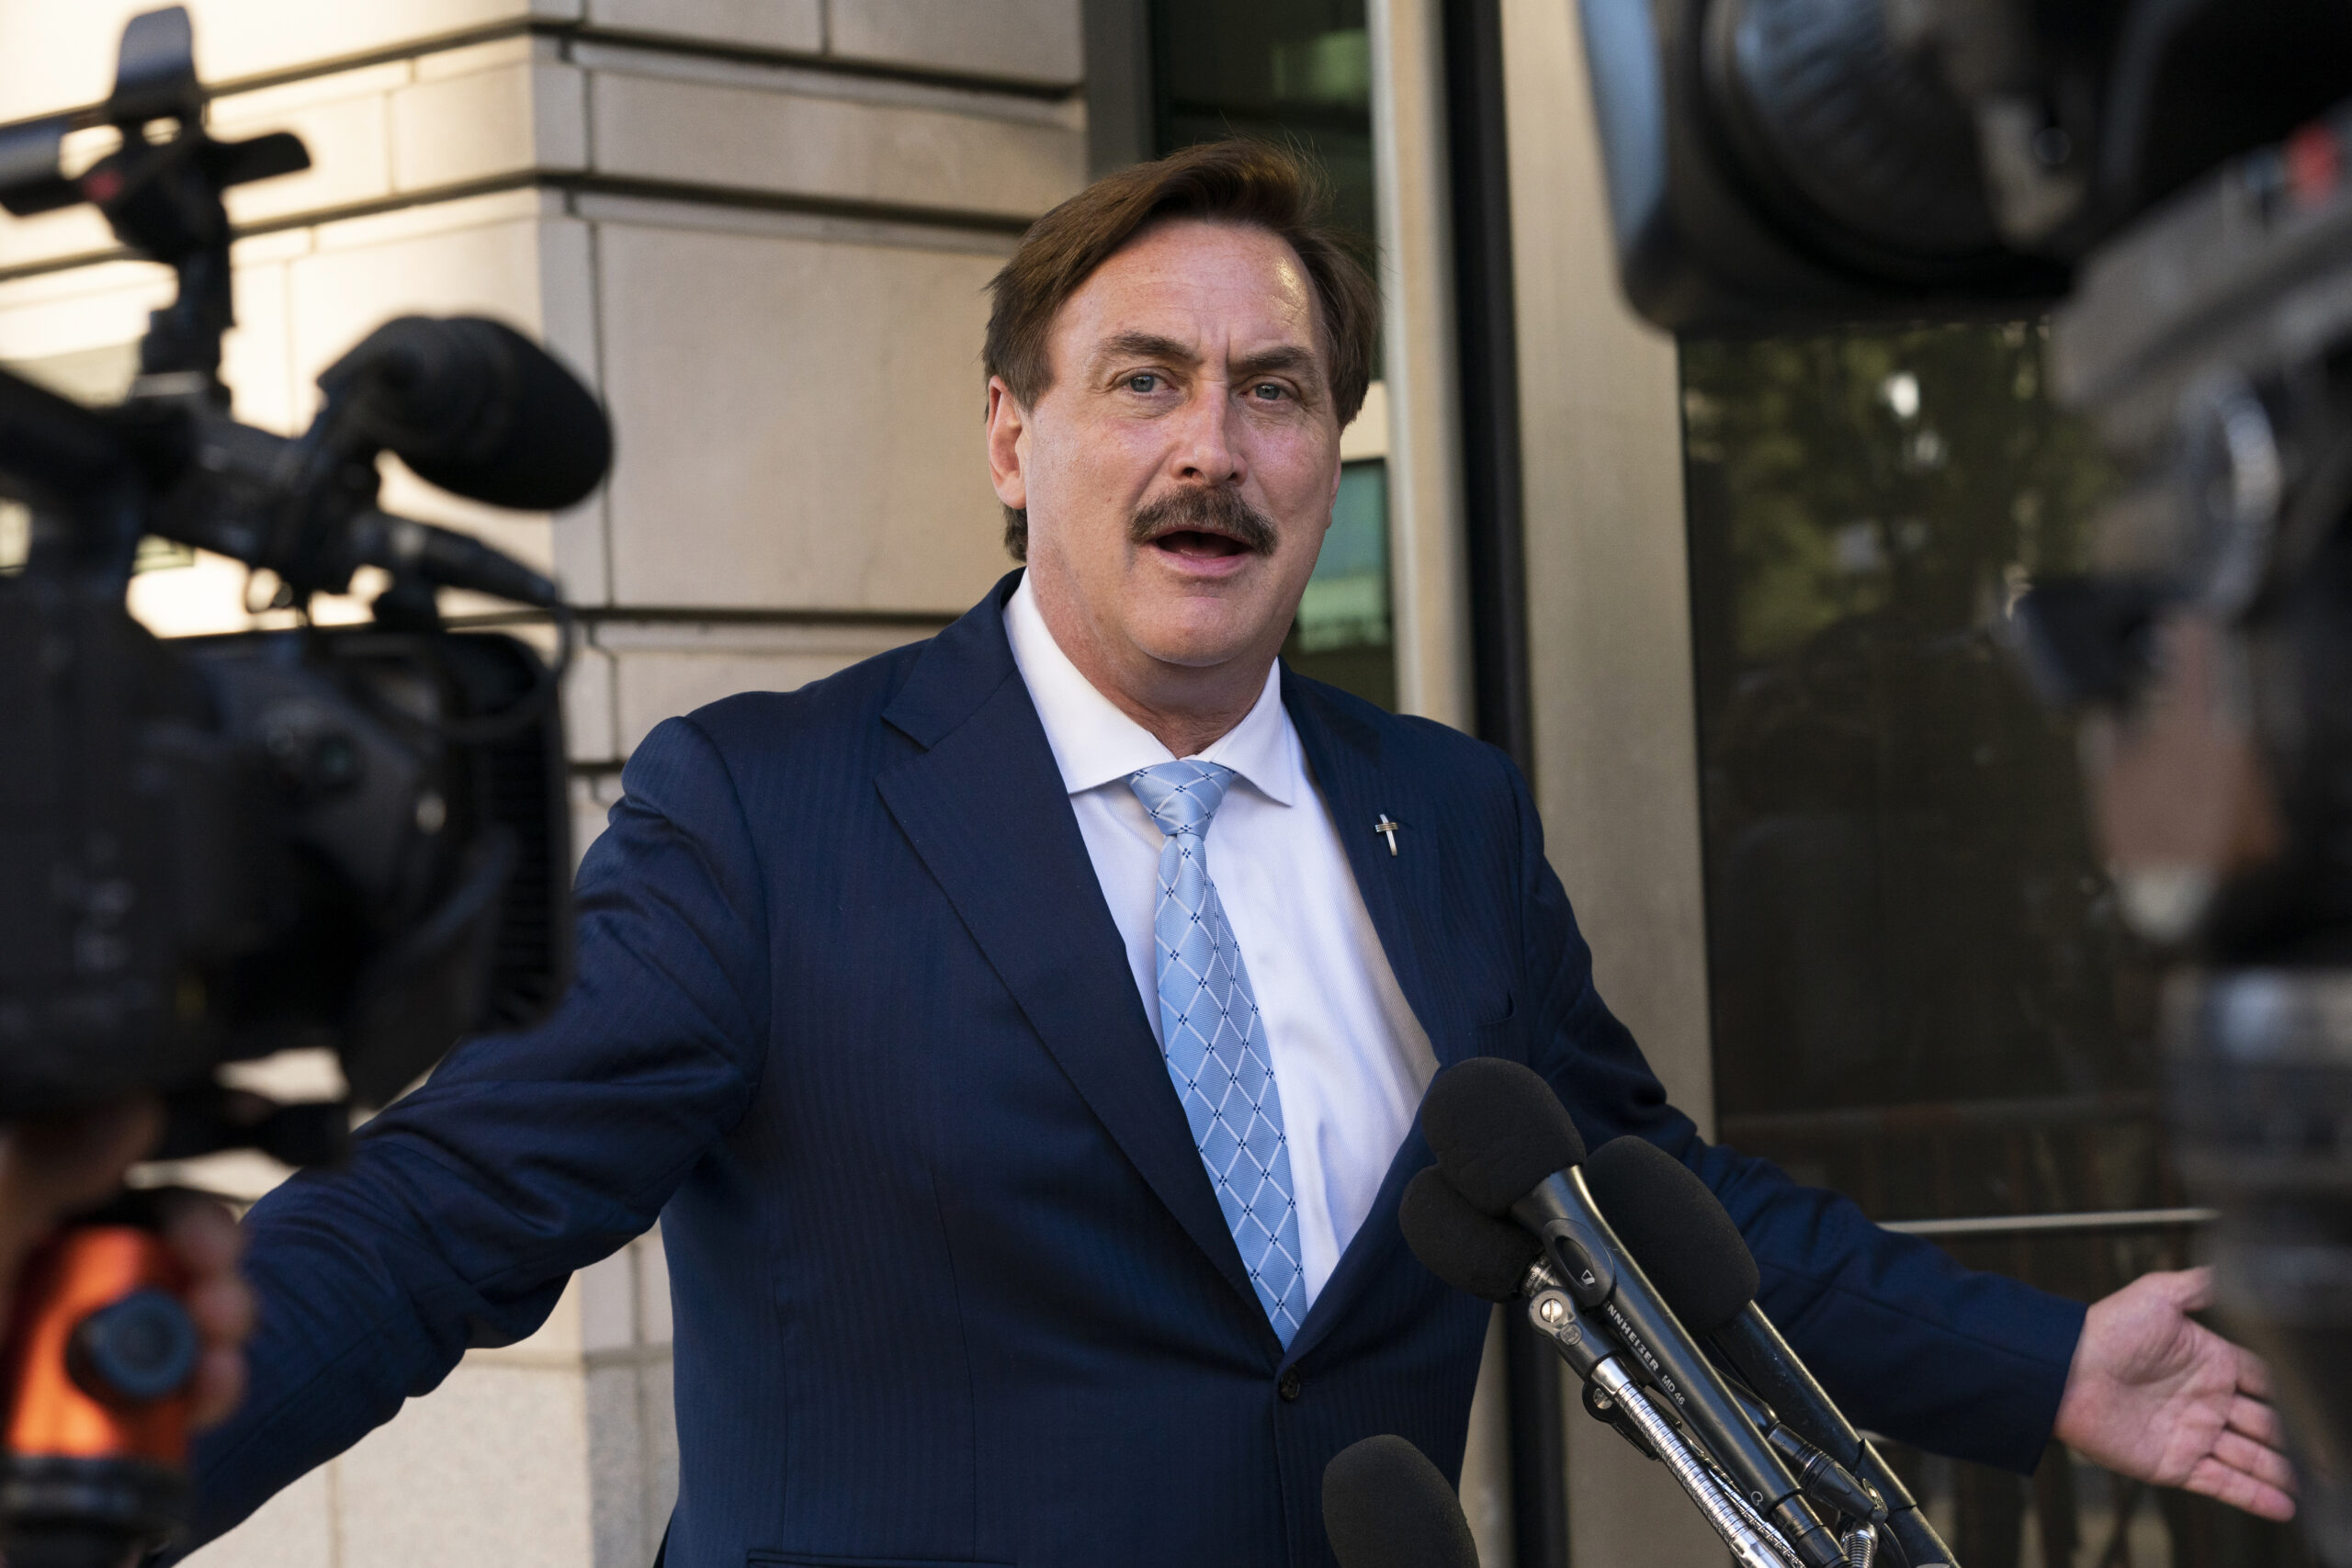 FILE - MyPillow chief executive Mike Lindell speaks to reporters outside federal court in Washington, Thursday, June 24, 2021. On Tuesday, Sept. 13, 2022, Lindell said that federal agents seized his cellphone and questioned him about a Colorado clerk who has been charged in what prosecutors say was a “deceptive scheme” to breach voting system technology used across the country. (AP Photo/Manuel Balce Ceneta, File)